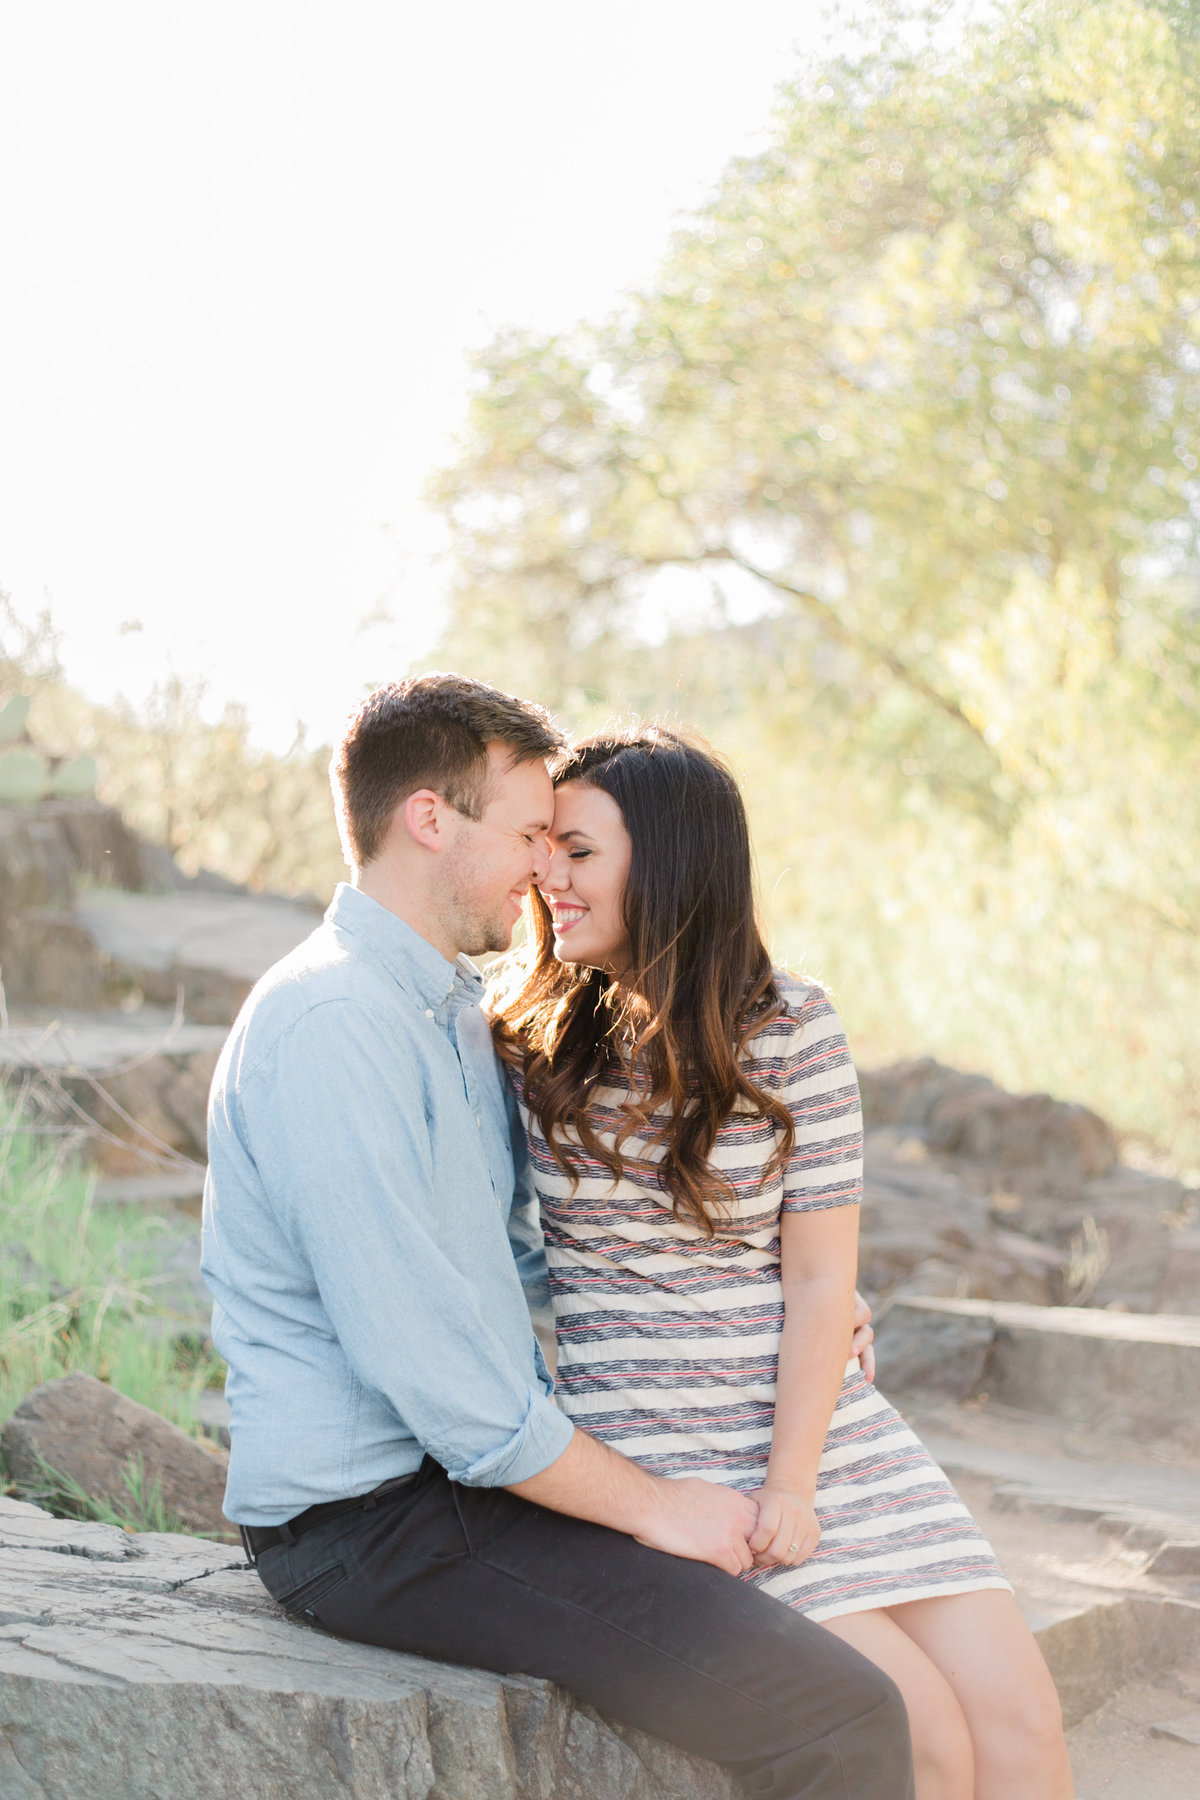 Karlie Colleen Photography - Claire & PJ - Engagement Session-177